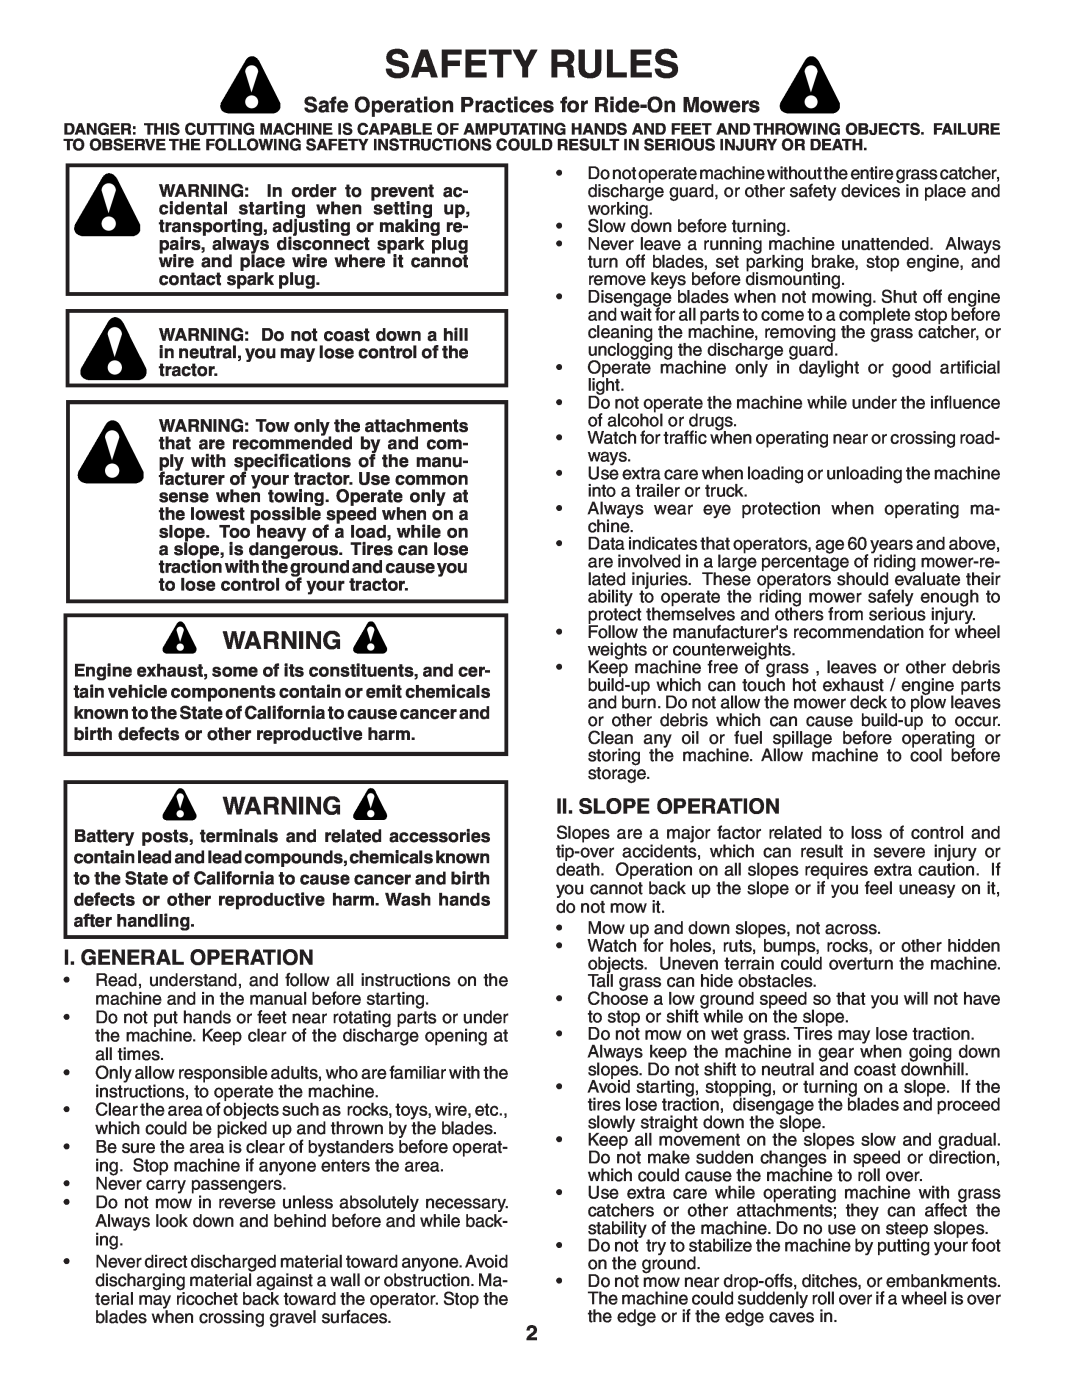 Poulan 404655 manual Safety Rules, Safe Operation Practices for Ride-OnMowers, I. General Operation, Ii. Slope Operation 